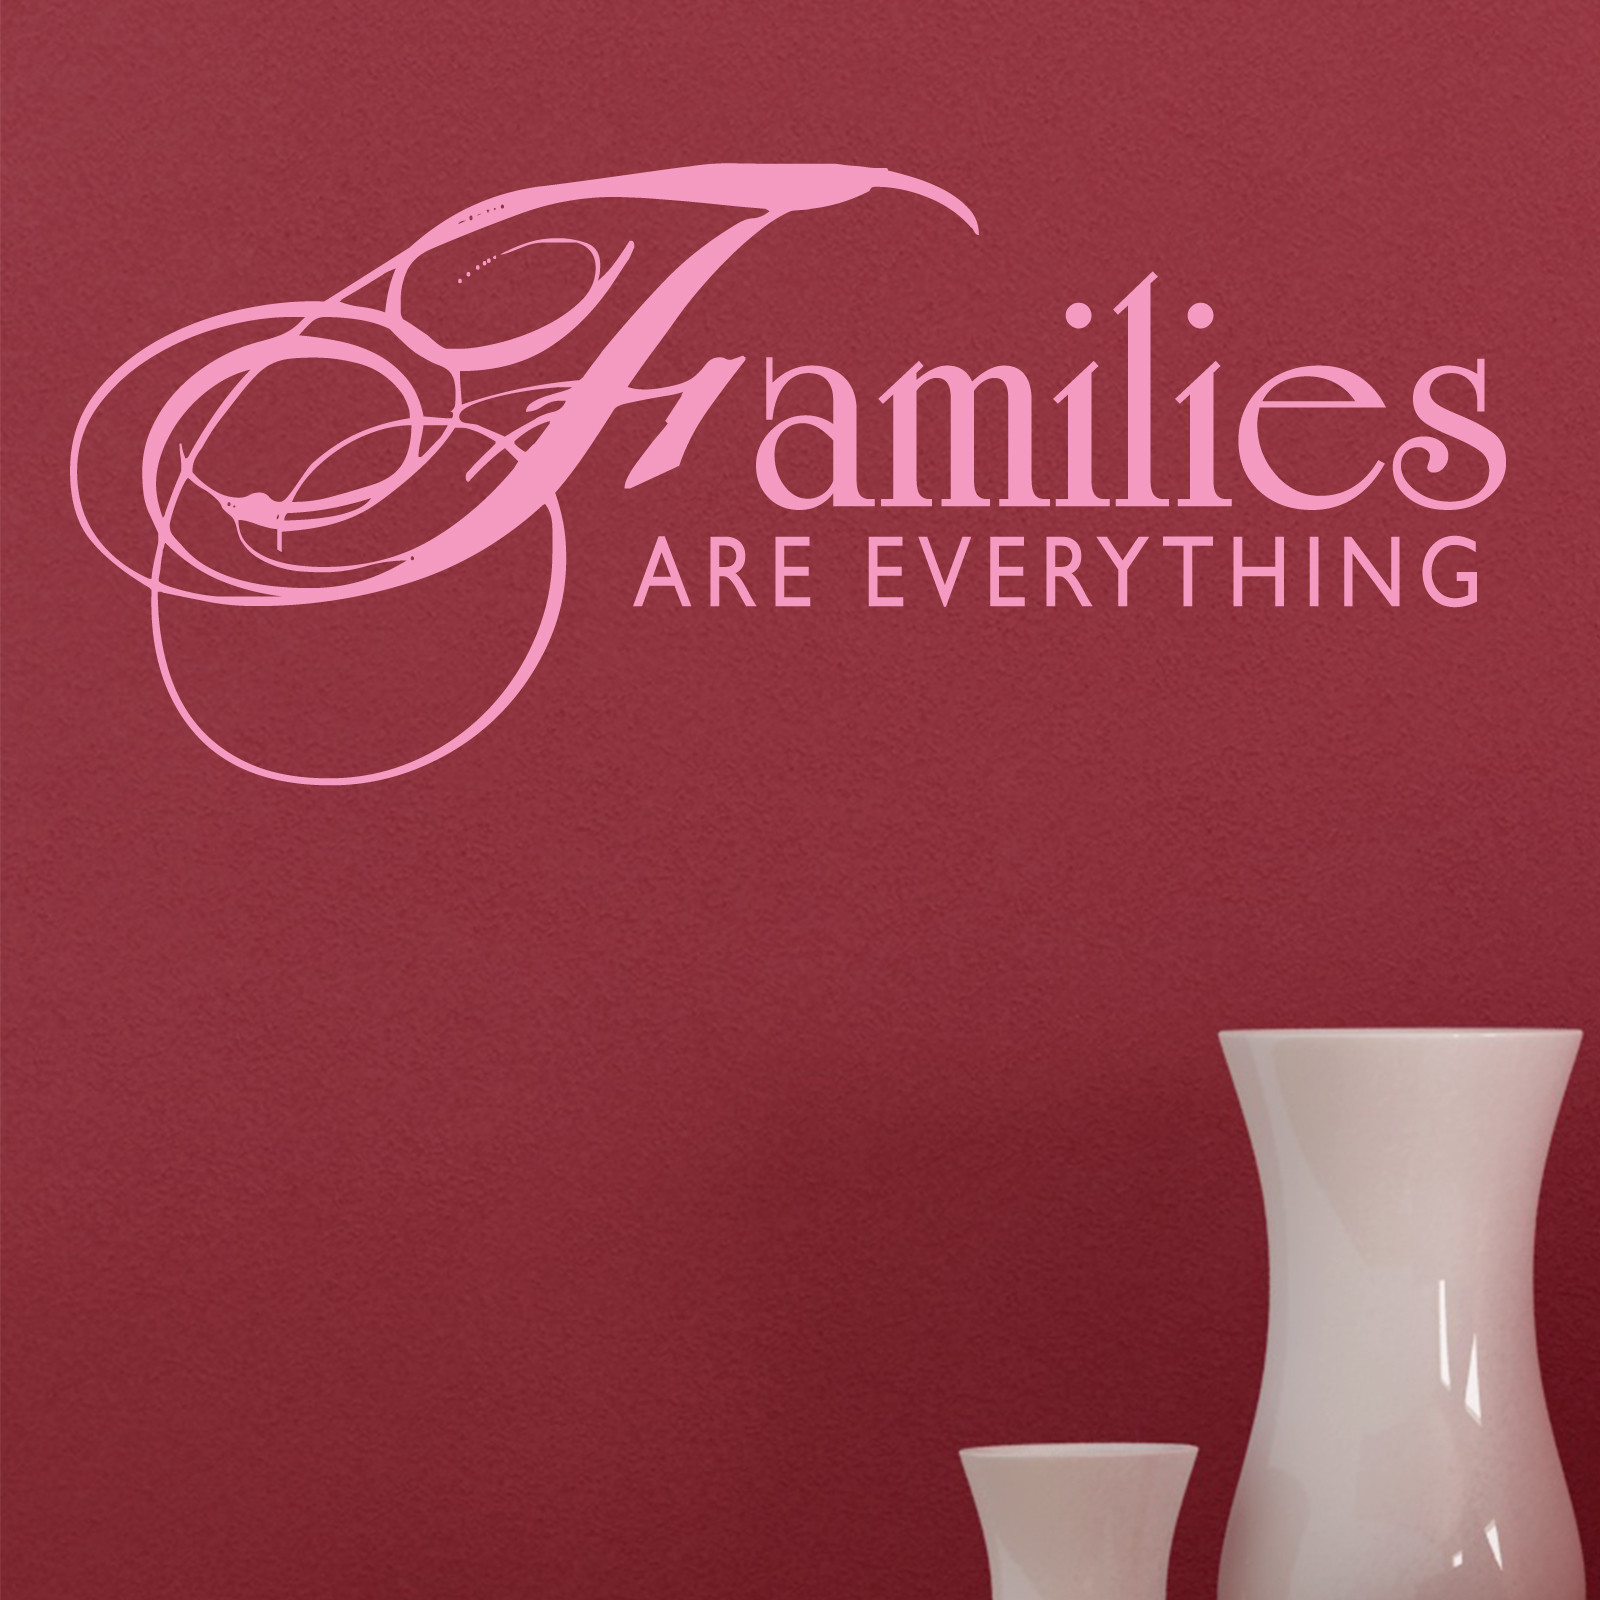 Family Over Everything Quotes
 Family Over Everything Quotes QuotesGram